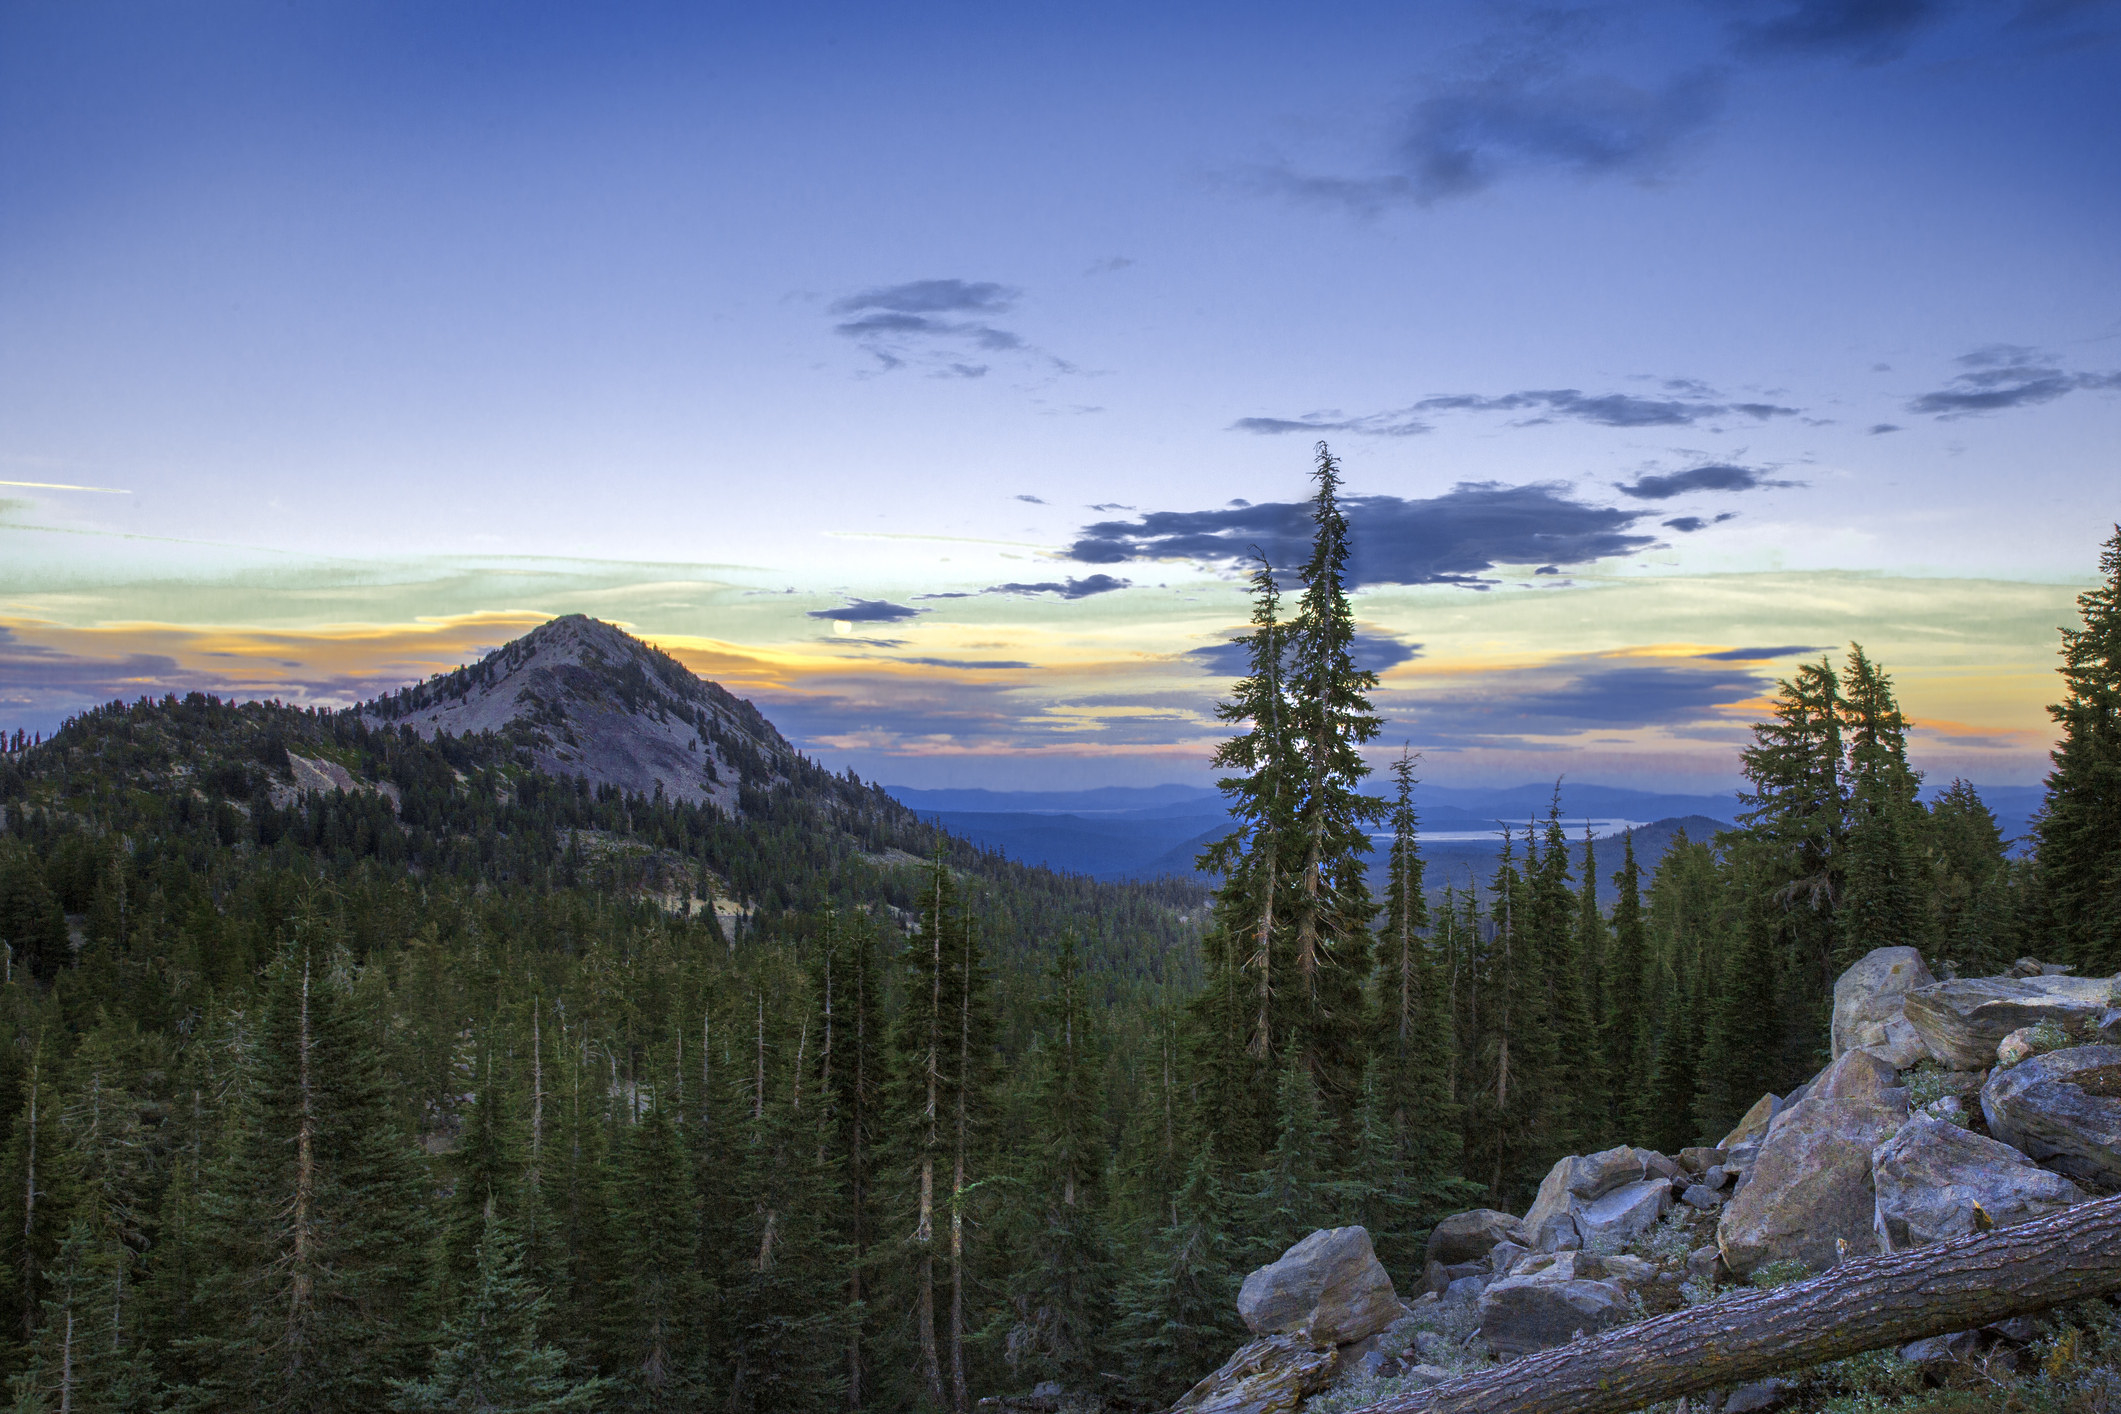 A scenic sunset view at Lassen Volcanic National Park